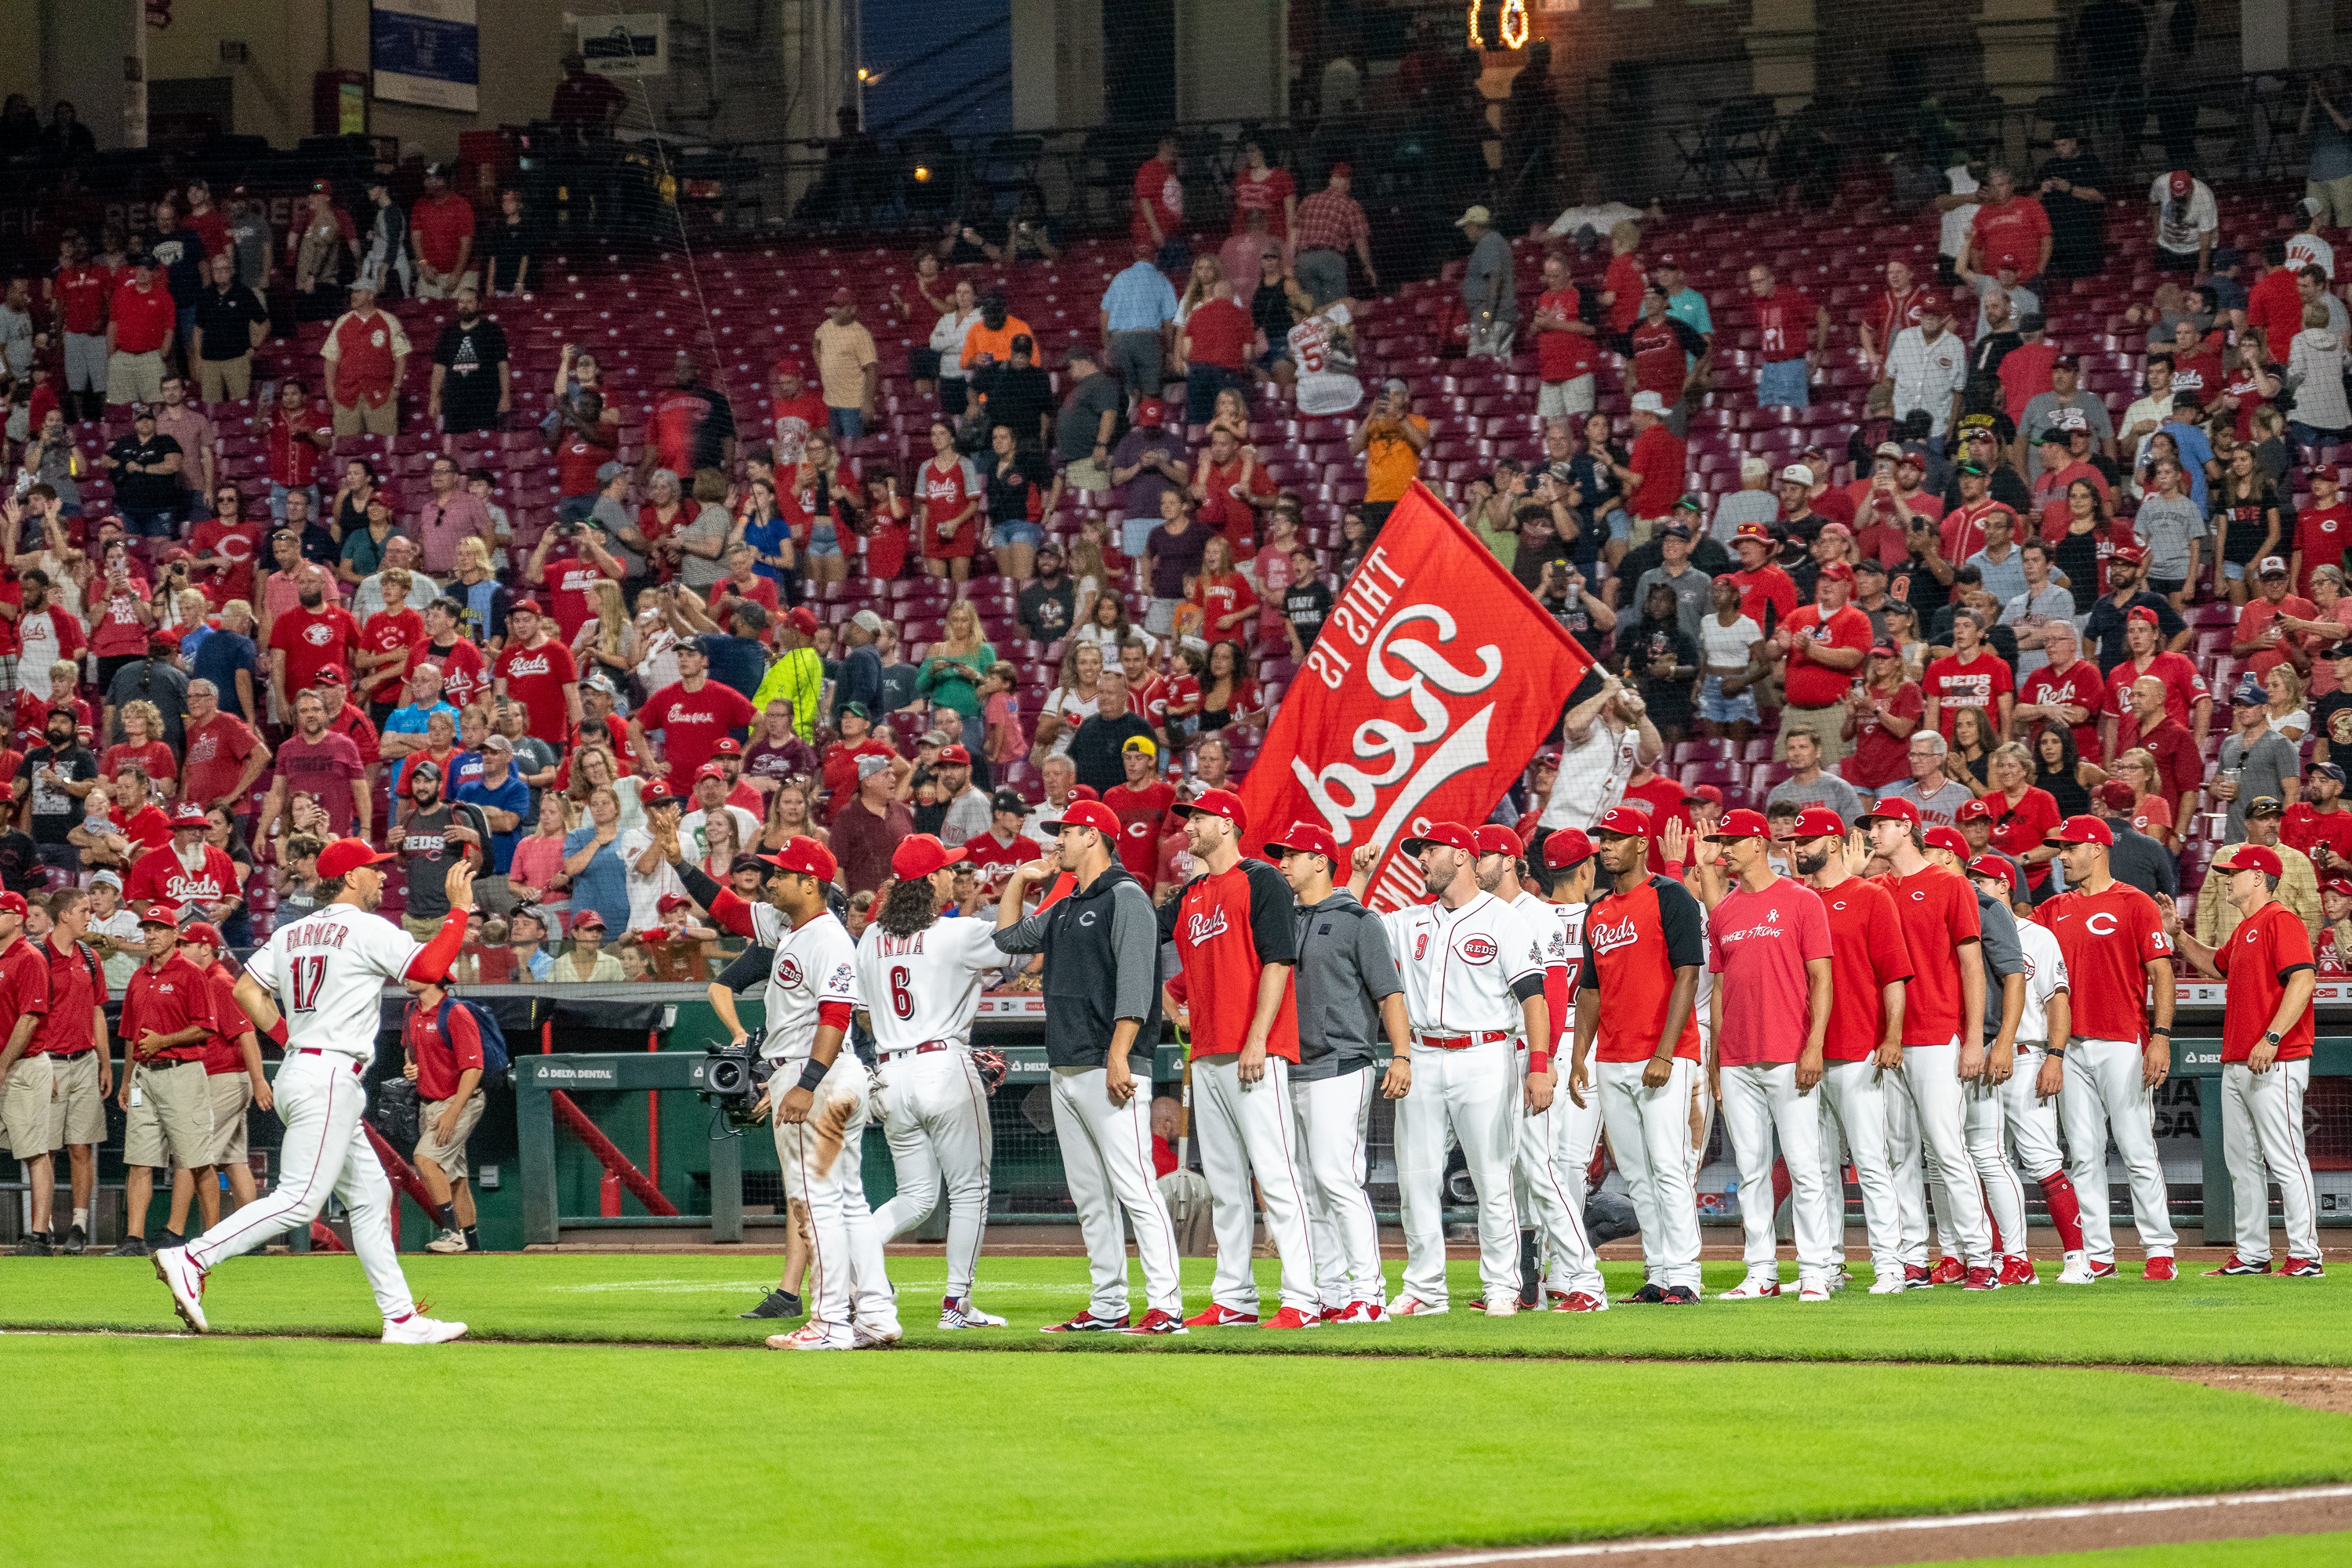 Cincinnati Reds on Twitter: The Reds Community Fund held a